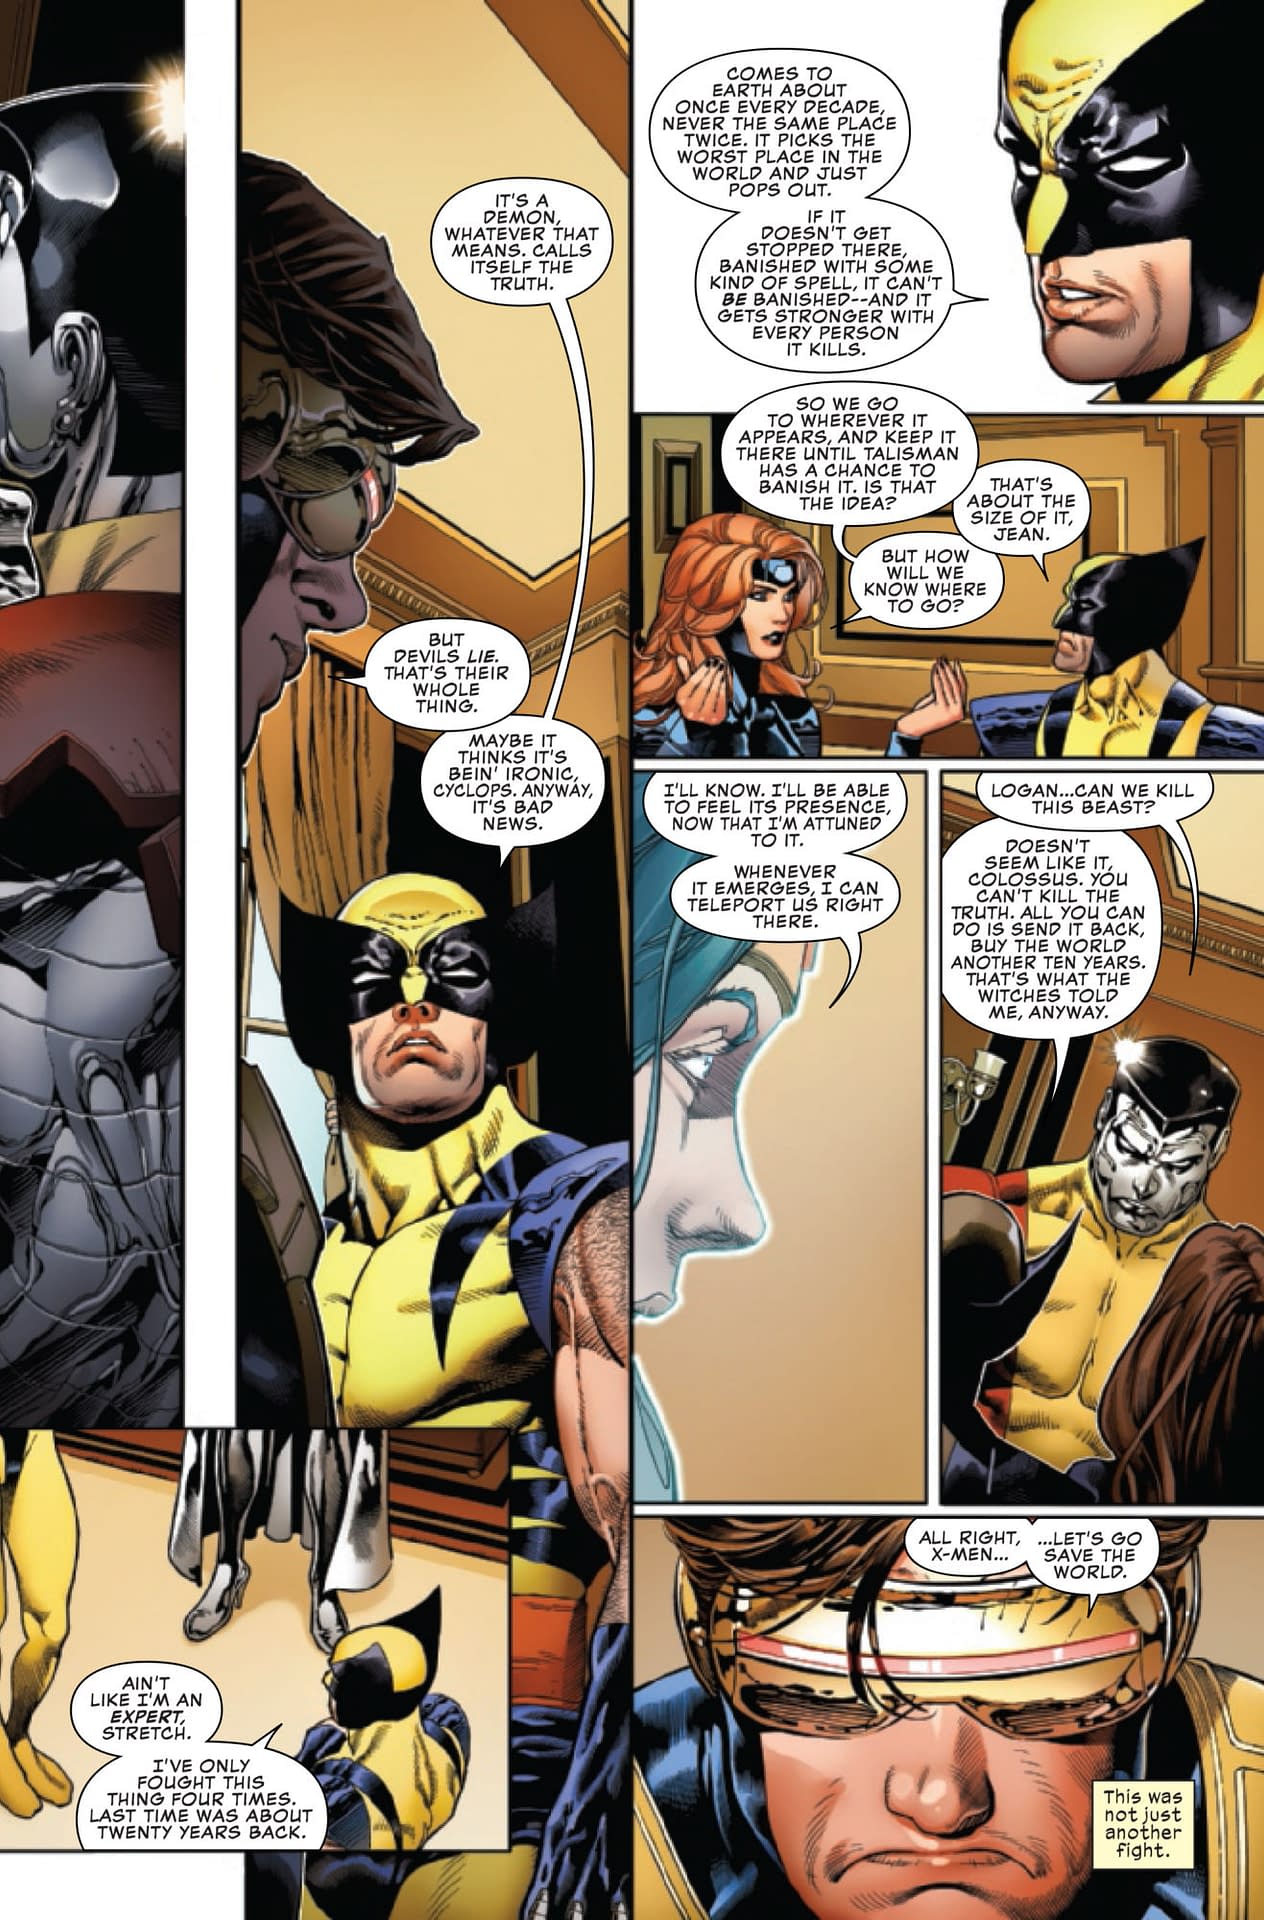 Marvel's Character Killing Is Out of Control in Marvel Comics Presents #5 (Preview)